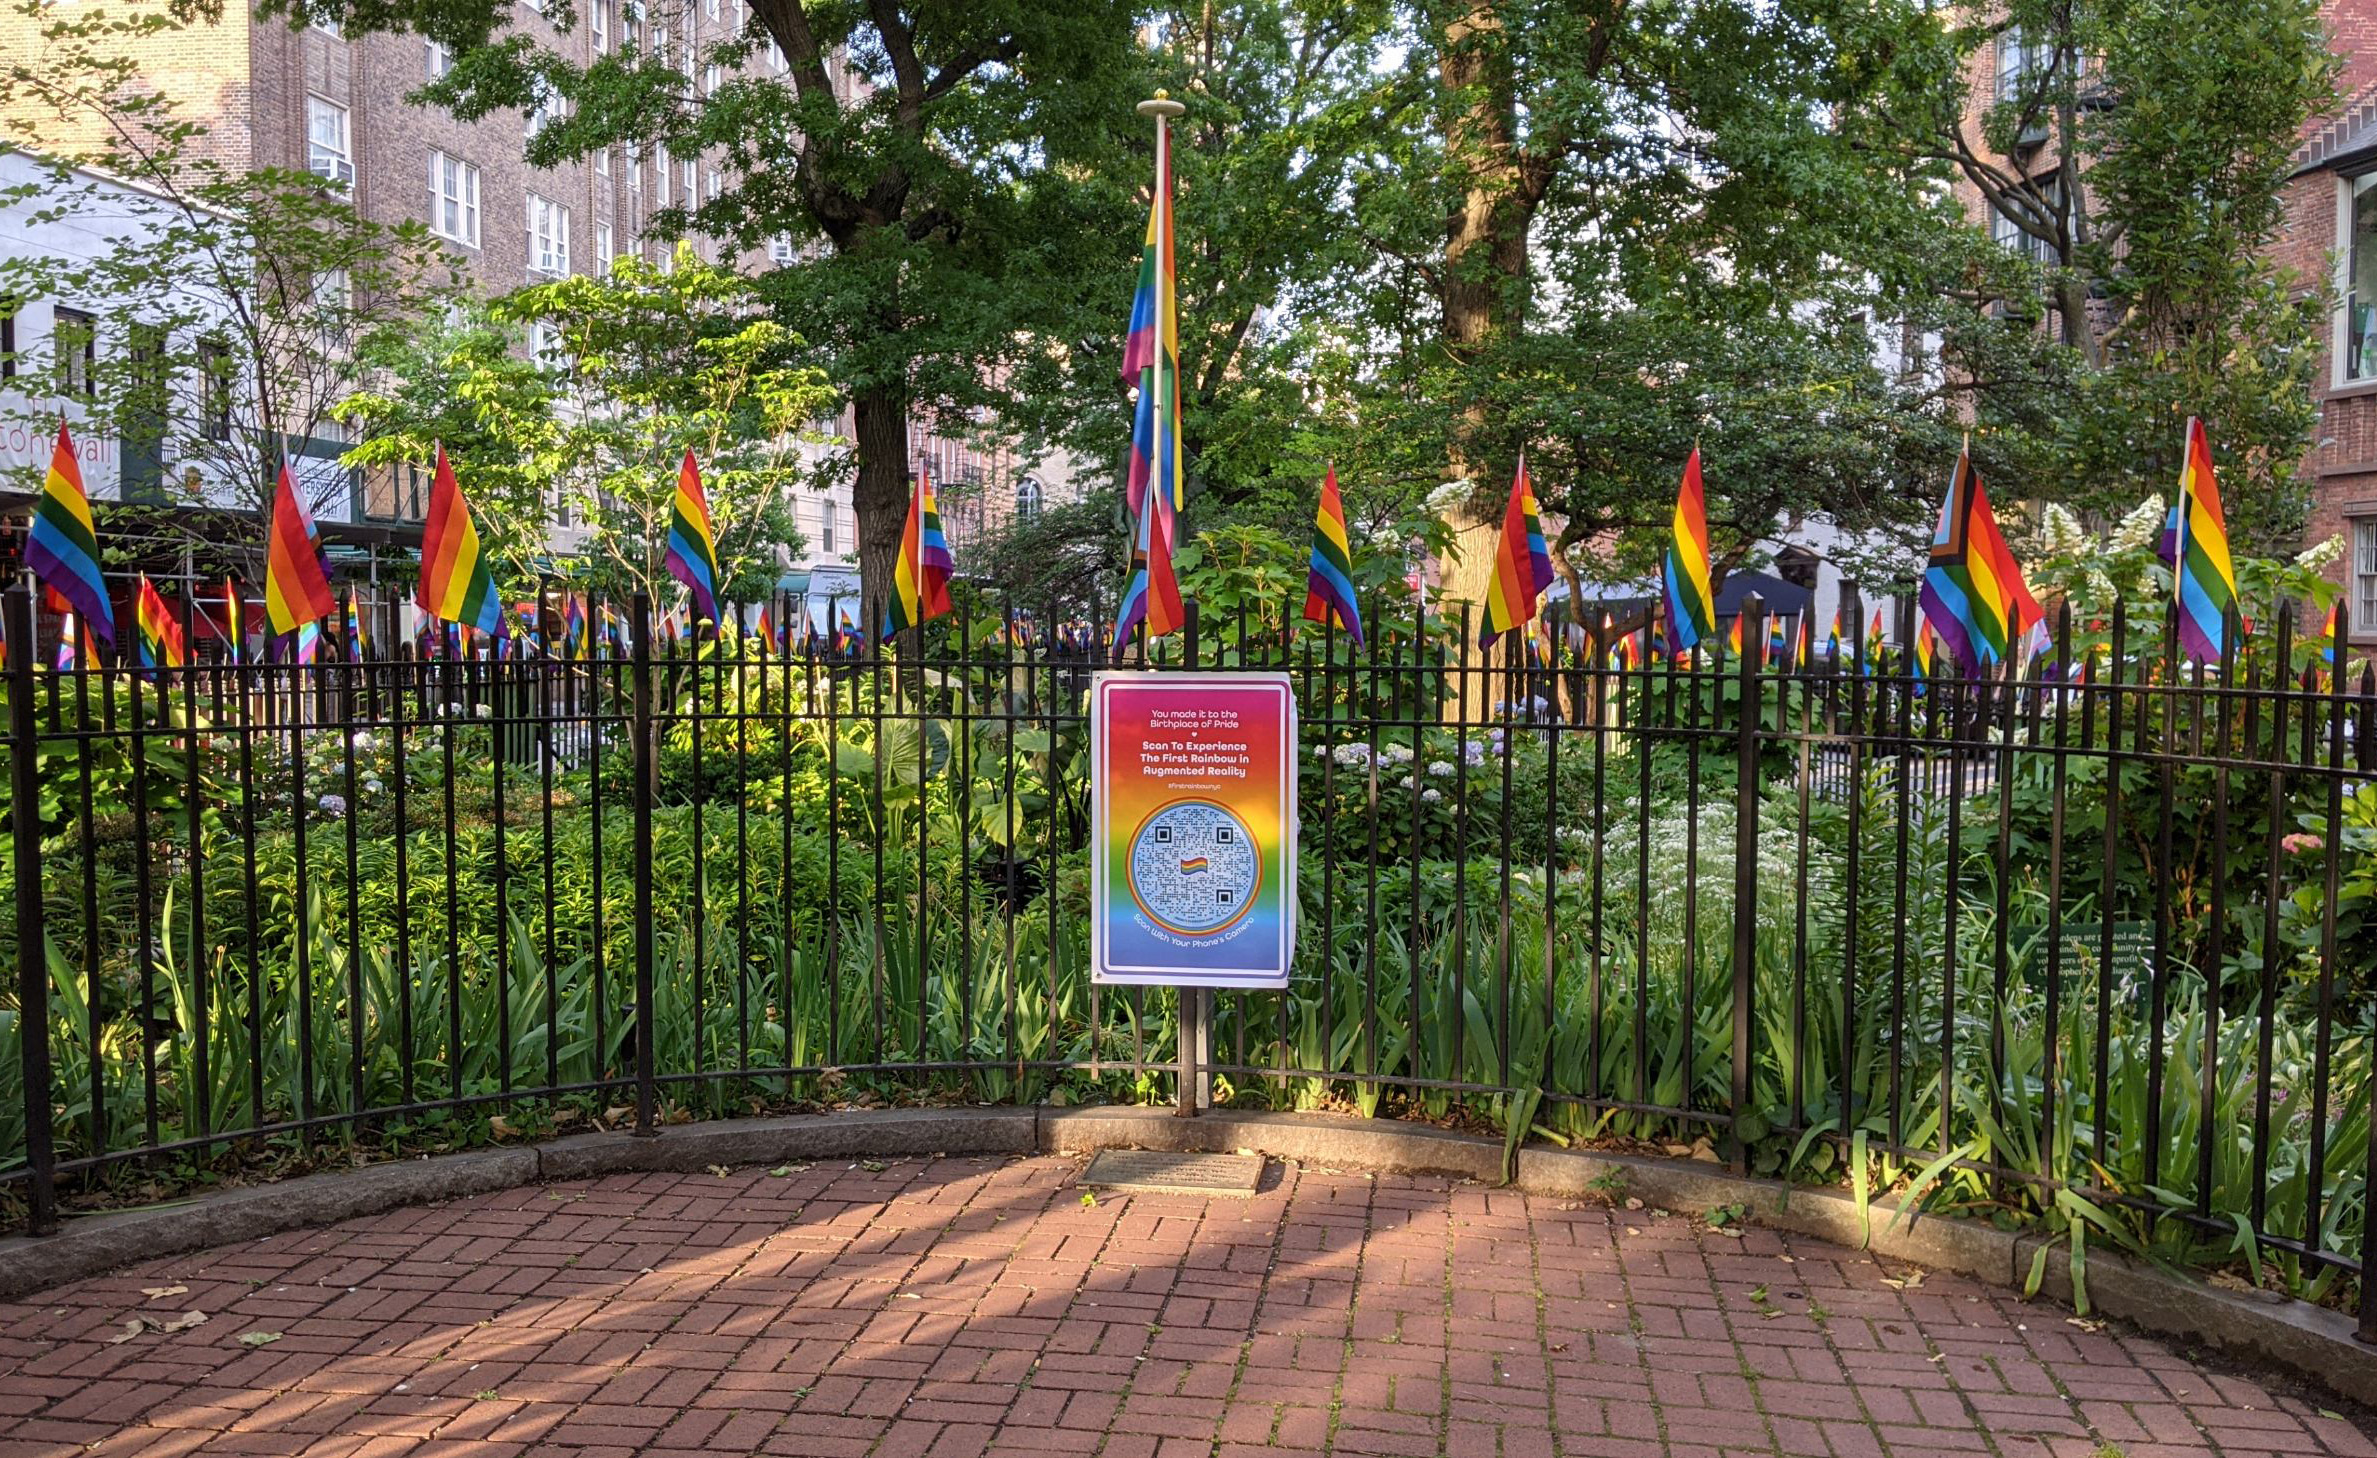 New York City Celebrates Pride with WebAR Experience at Birthplace of Gay Civil Rights Movement